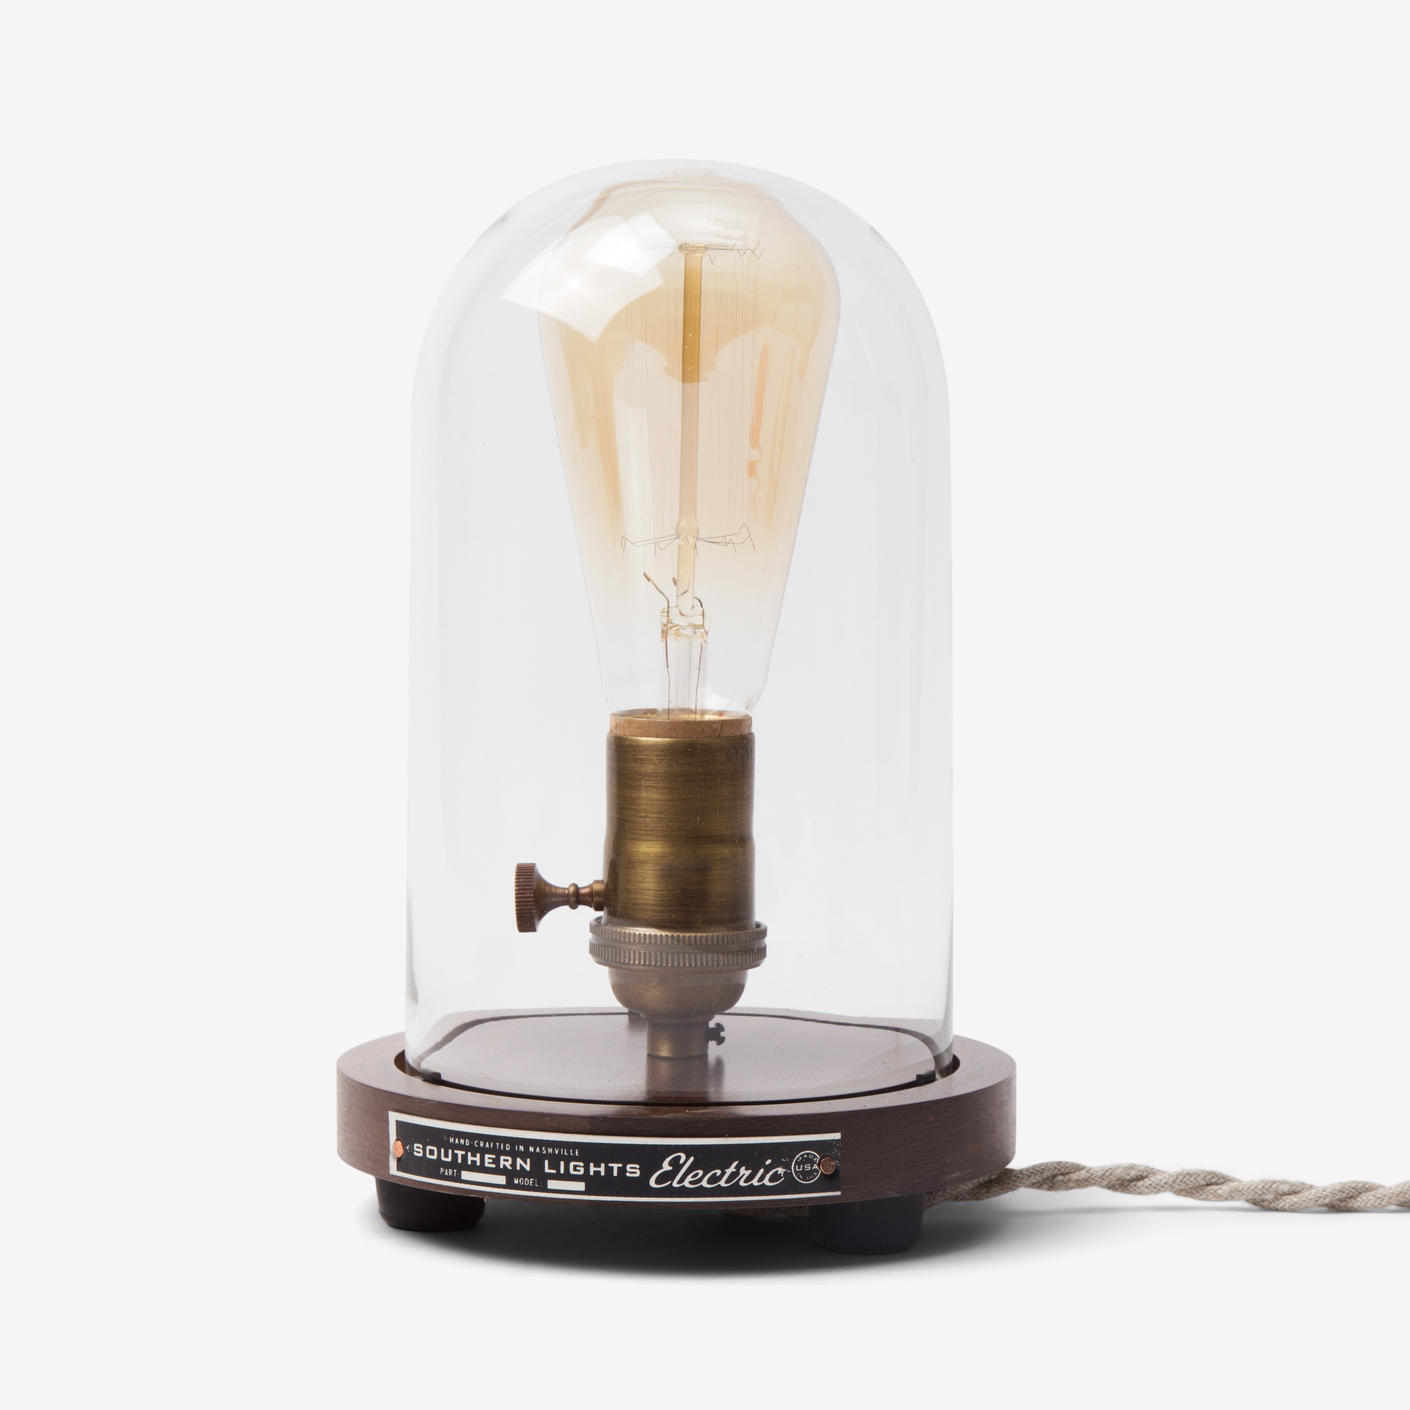 Southern Lights Electric The Original Bell Jar Table Lamp | Bespoke Post